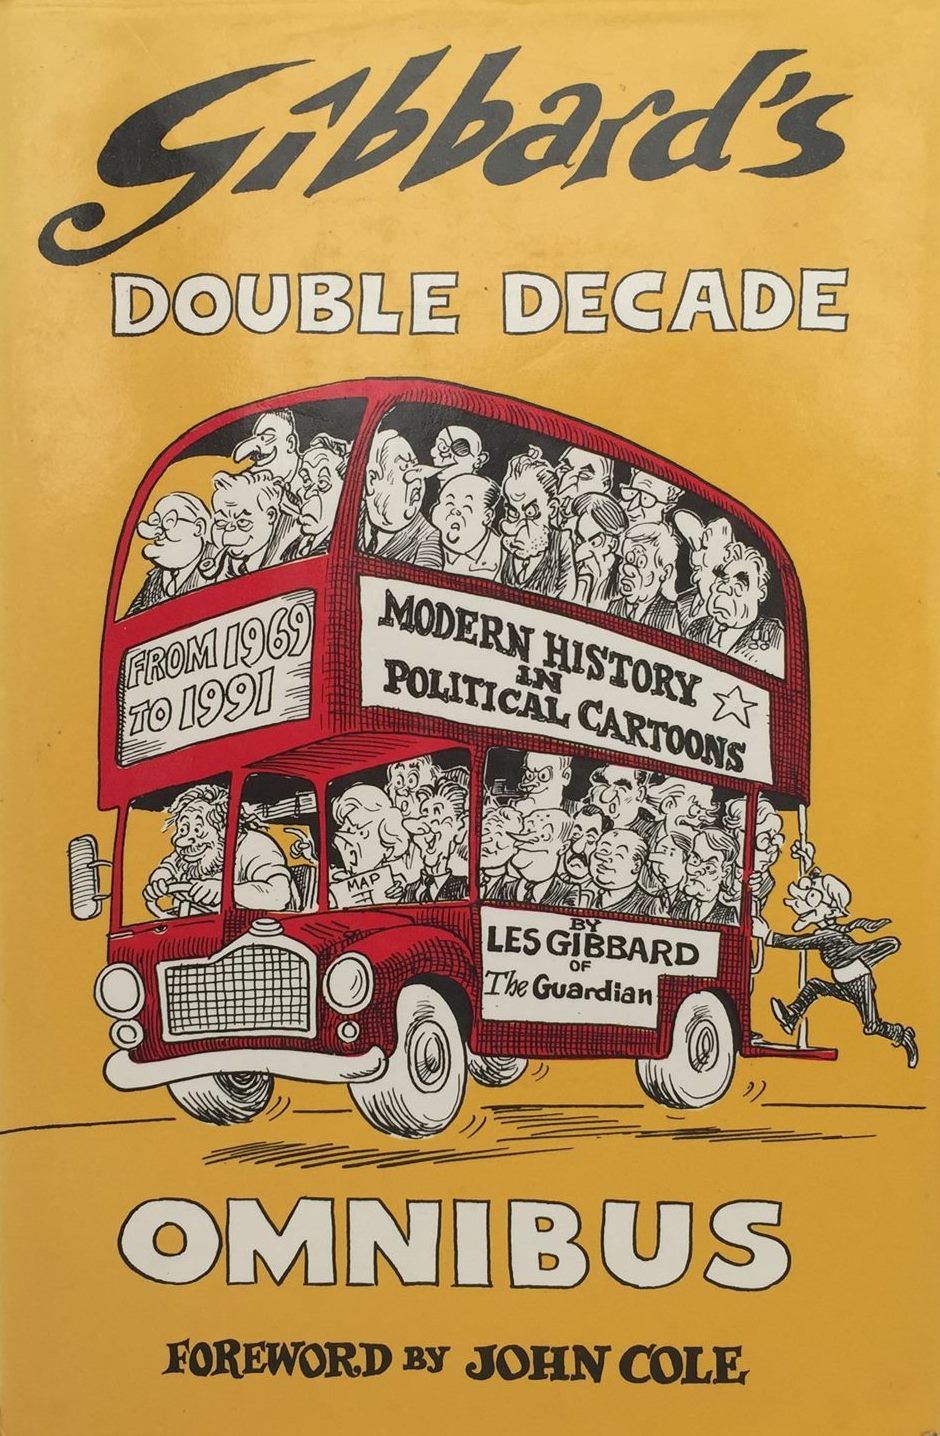 GIBBARD'S DOUBLE DECADE OMNIBUS: Modern History In Political Cartoons 1969-1991